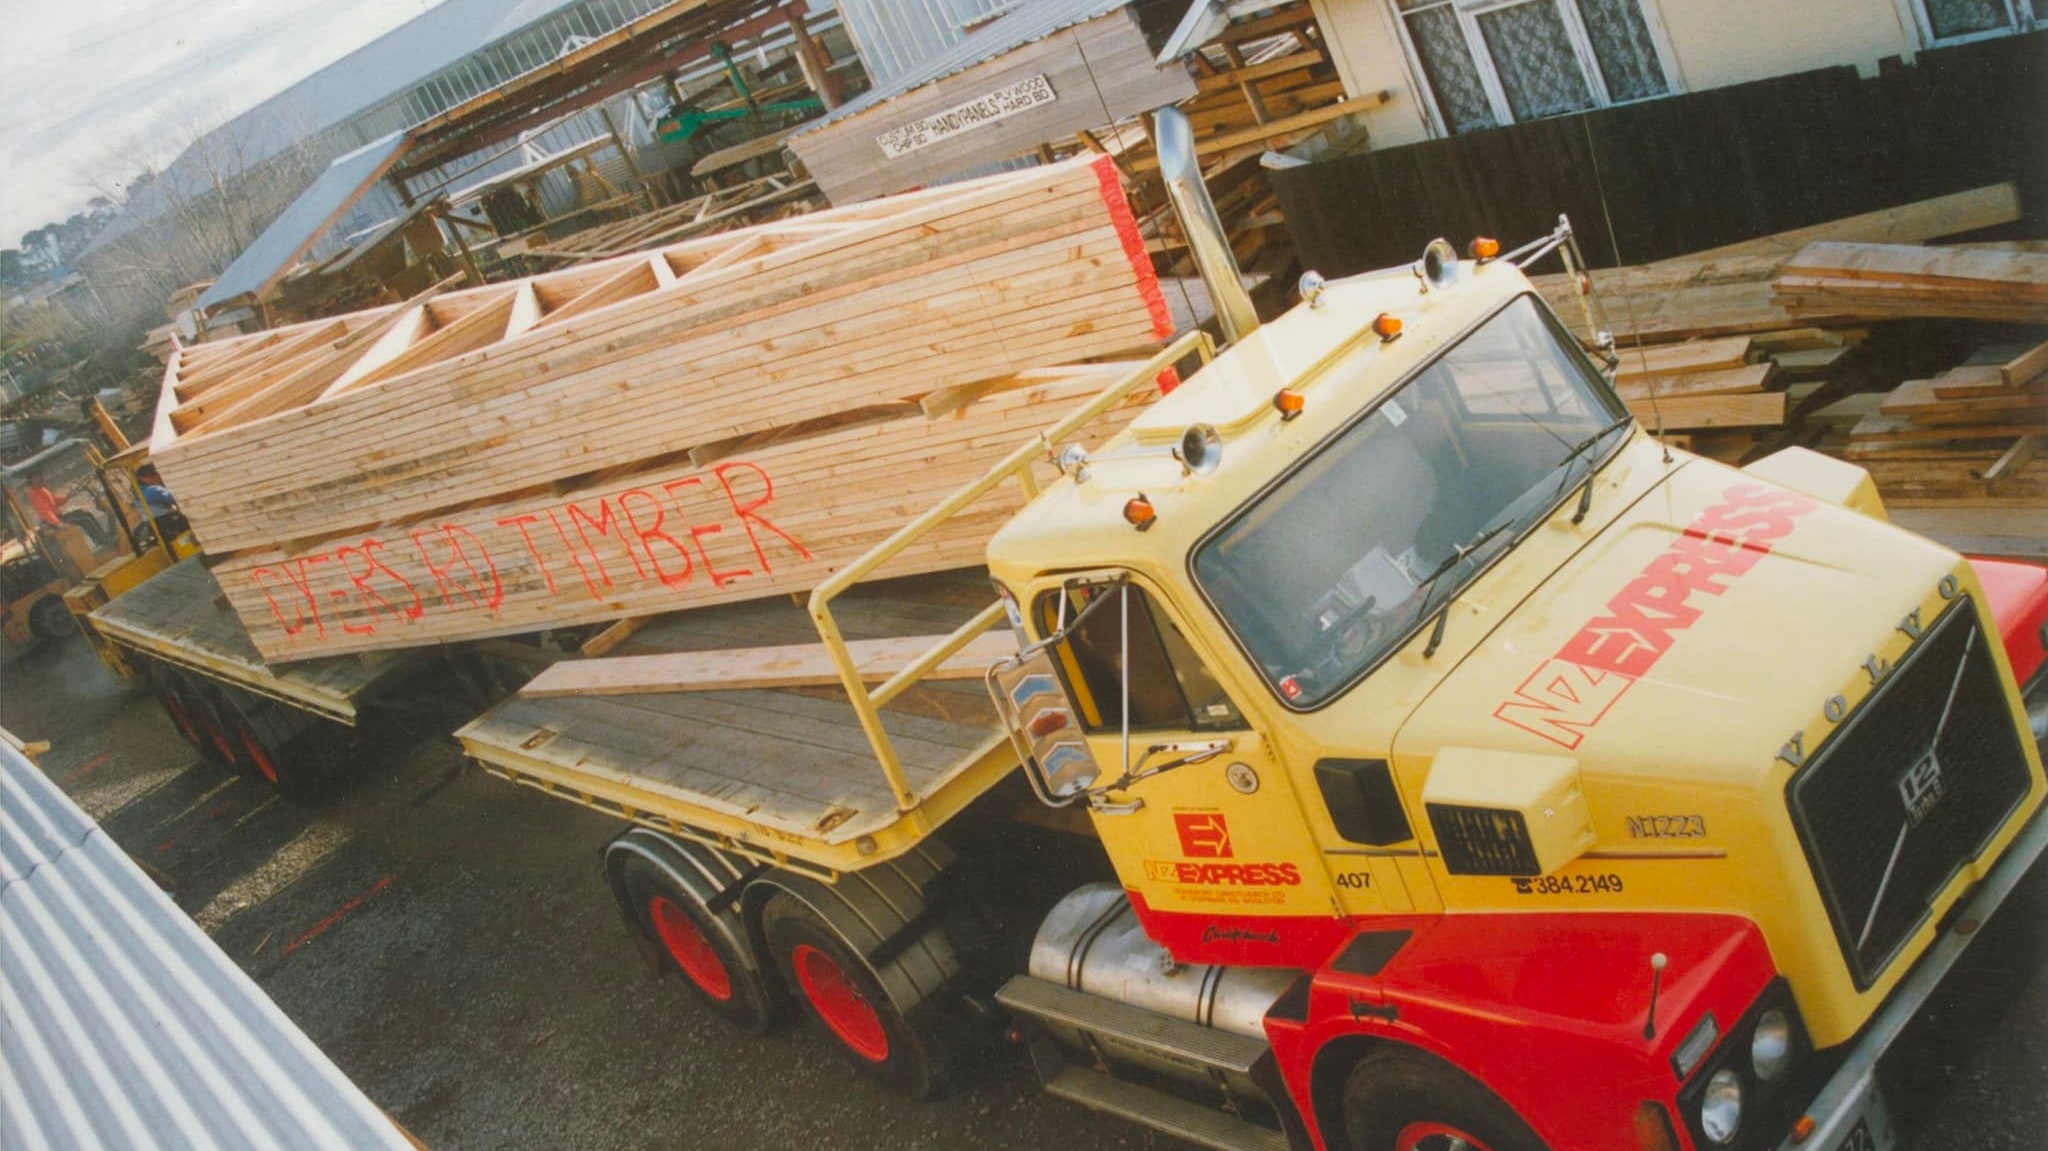 Dyers Road ITM have a long history of serving building supplies to Christchurch & Canterbury